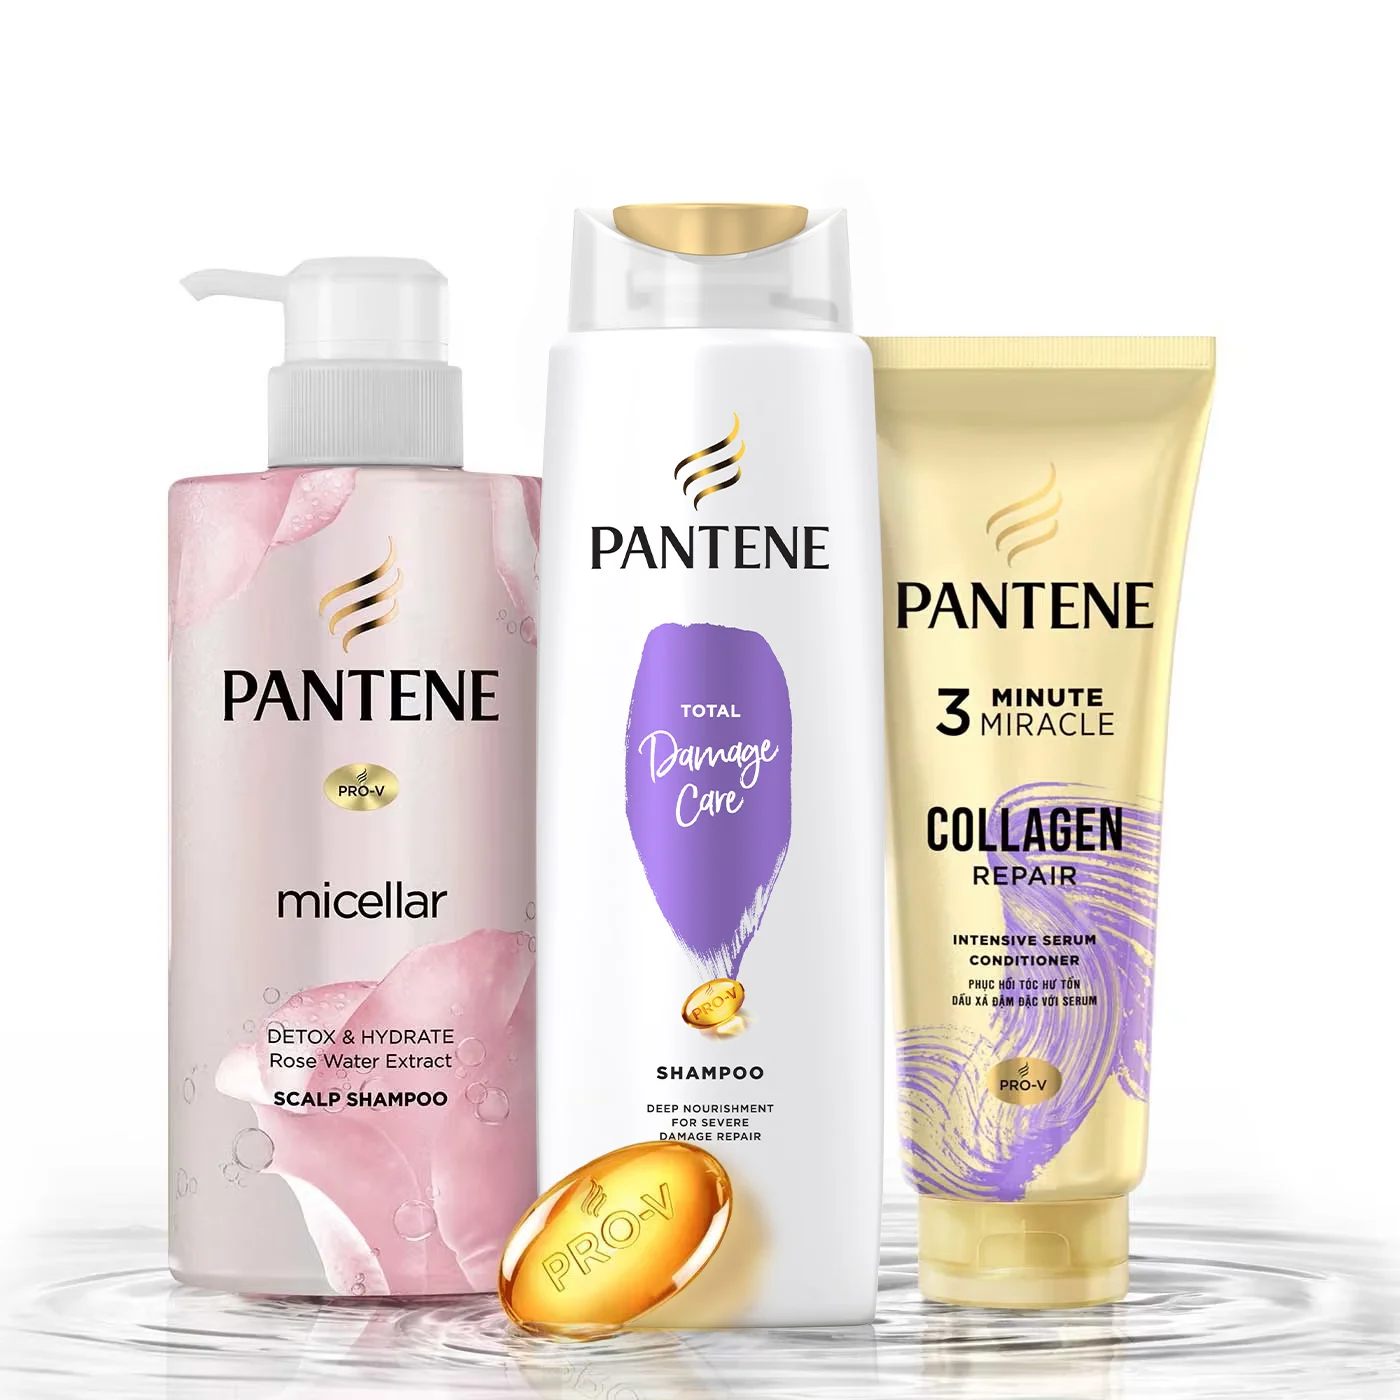 Product range of Pantene Micellar Detox & Hydrate Scalp Shampoo, Total Damage Care Shampoo & 3 Minute Miracle Collagen Repair Conditioner